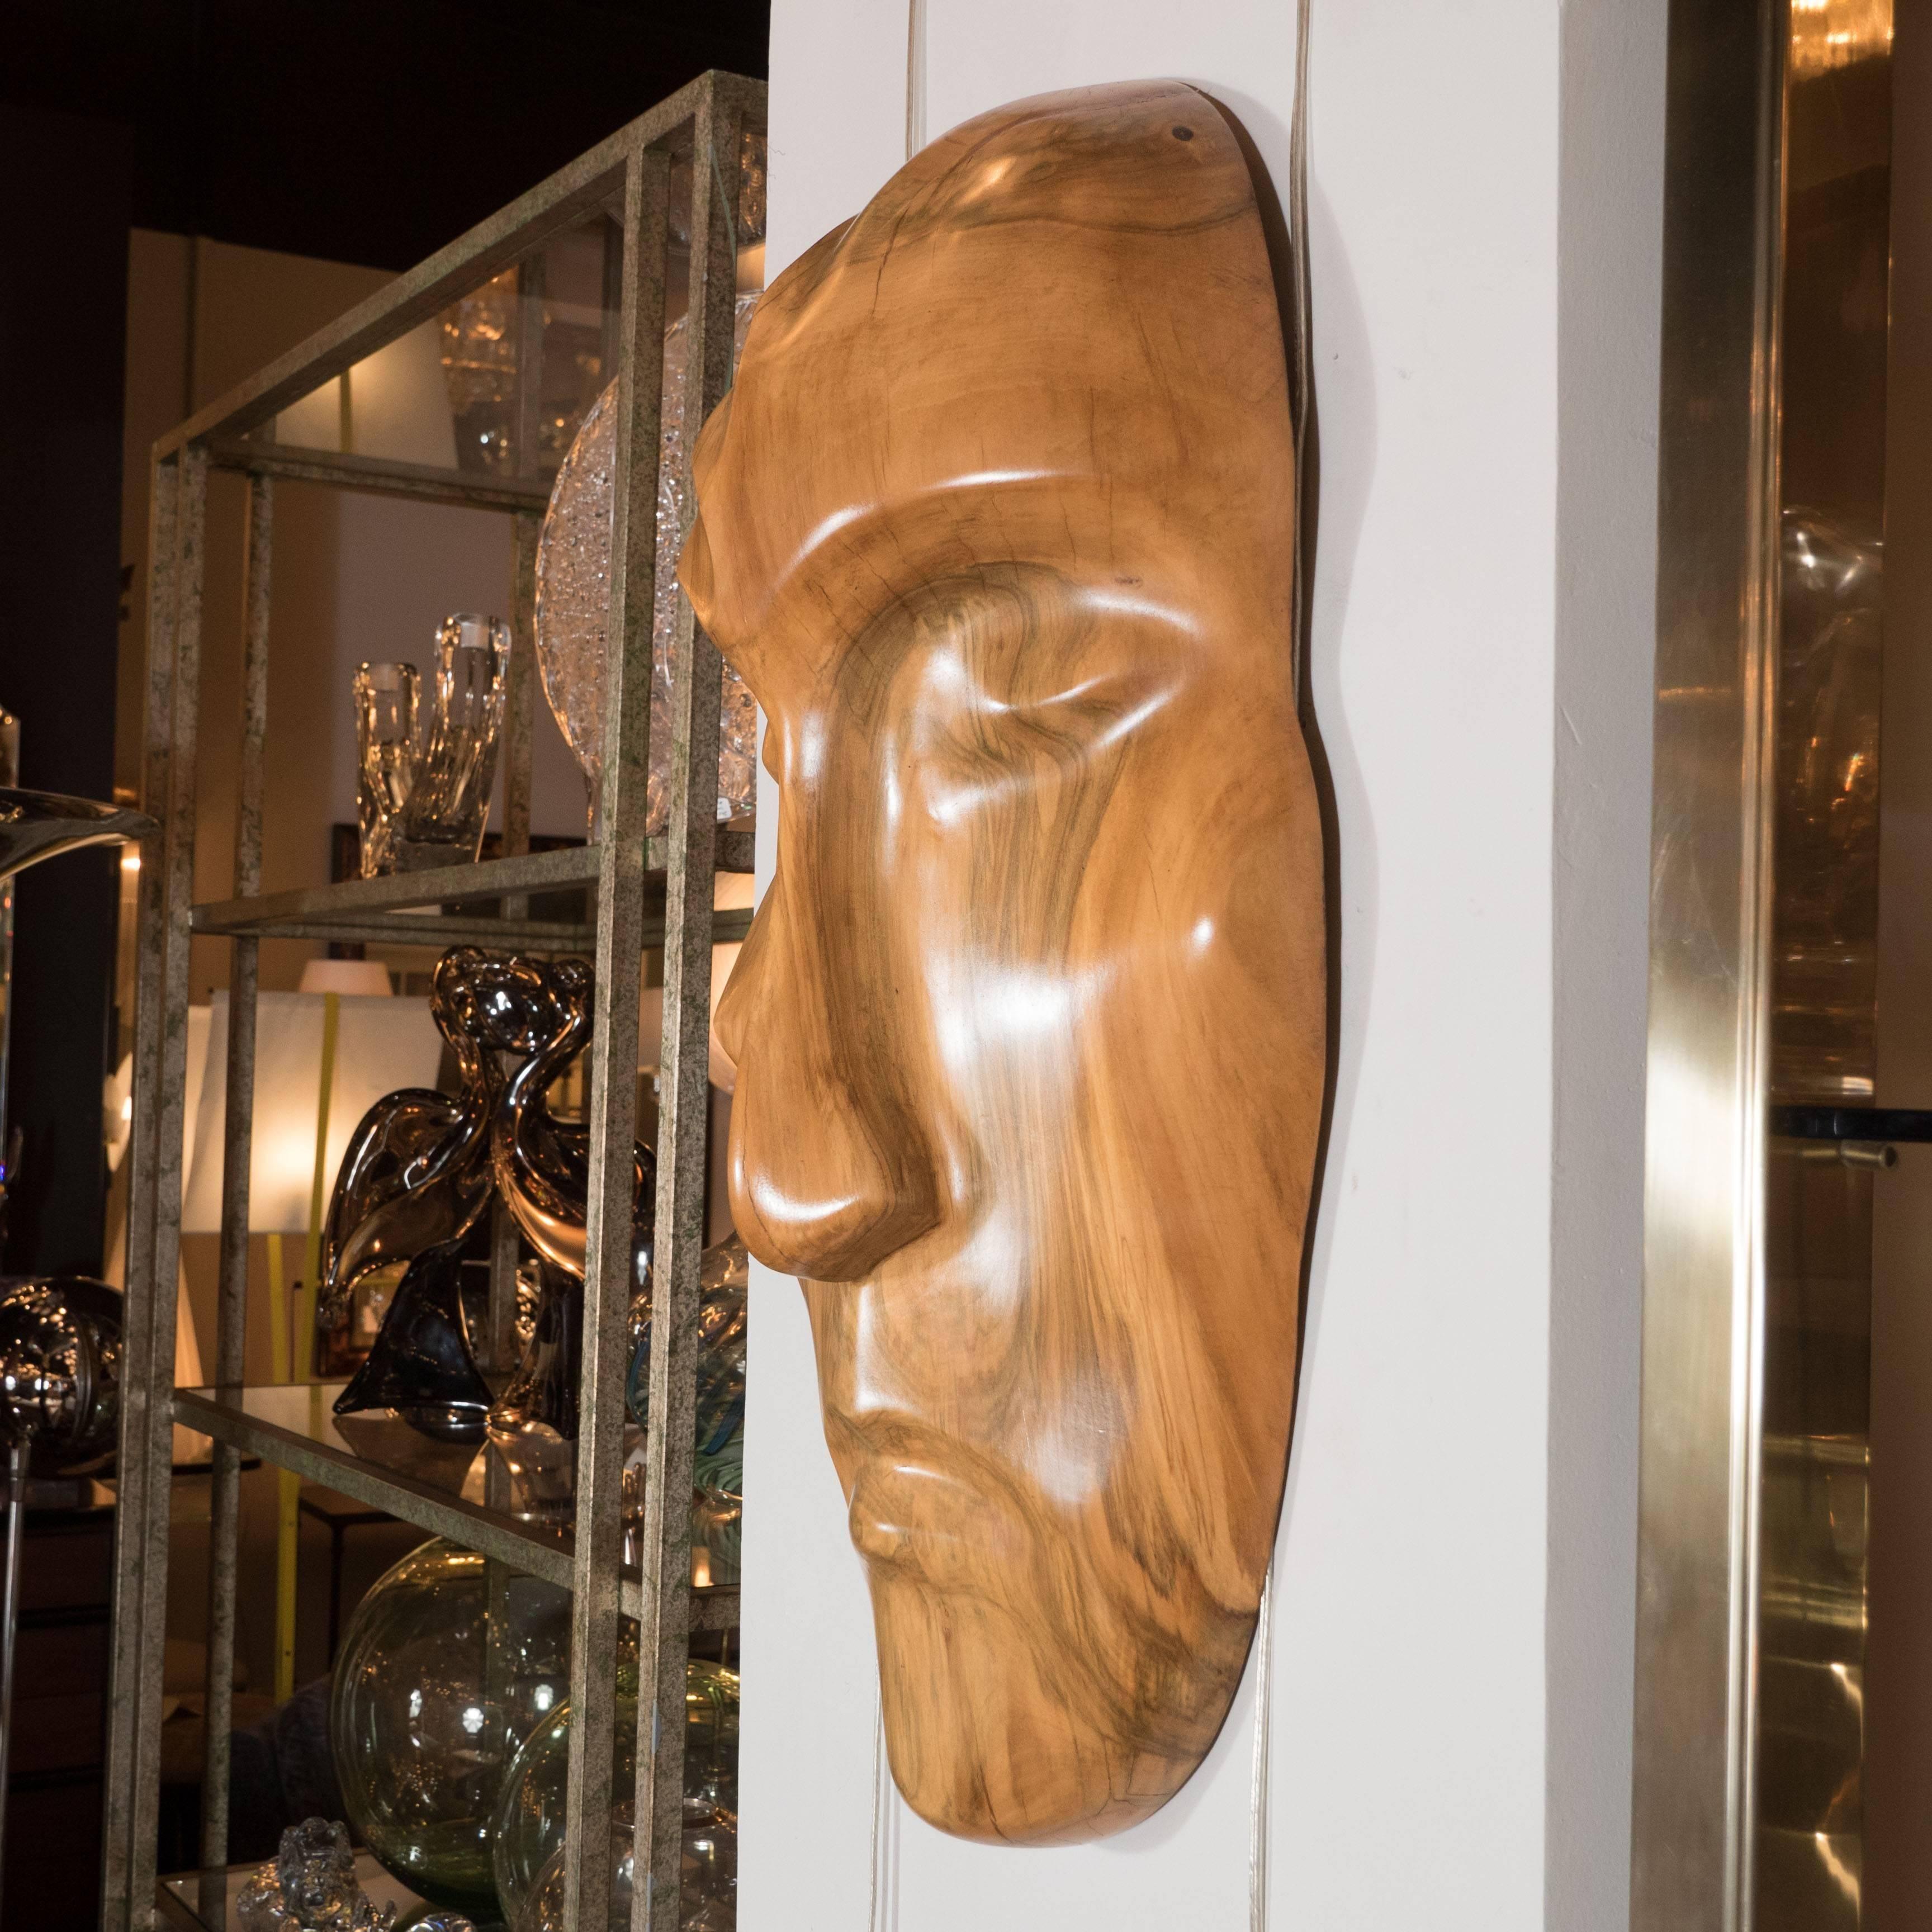 This striking Mid-Century Modernist mask in hand carved exotic honey hued wood reads as both tribal and contemporary. The face- reminiscent of a Haida mask- exhibits a serene expression, evocative of a sleeping state. This sculpture embodies the